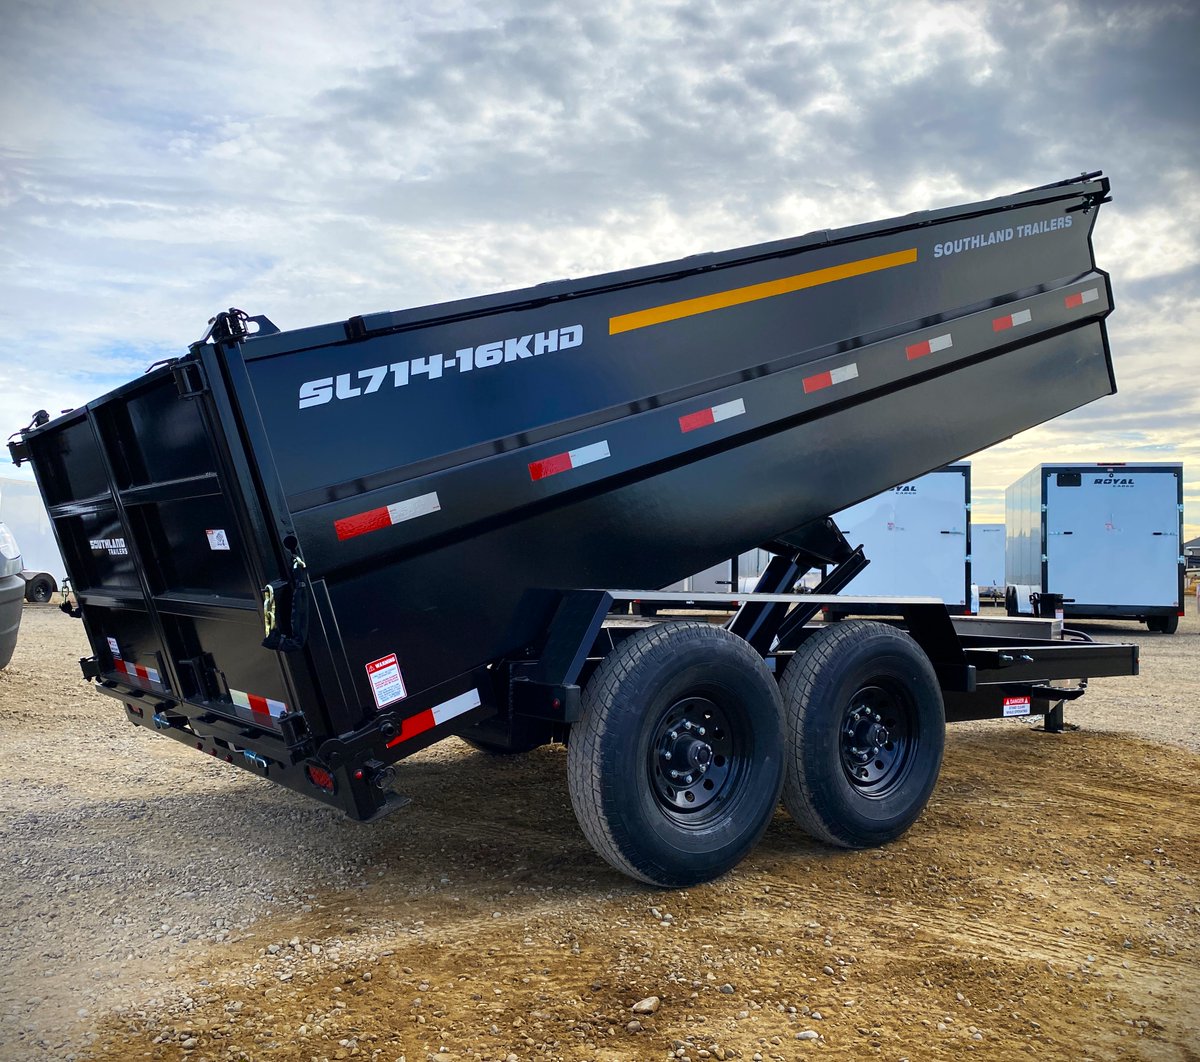 SL714-16K High Side Dump Trailer ready to work for all your oversized loads. Check them out online or at your nearest dealer. southlandtrailers.com/where-to-buy/ #teameffort #industryleader #empoweringothers #equipmenttrailer #hiringnow #trades #careers #growthmindset #yql